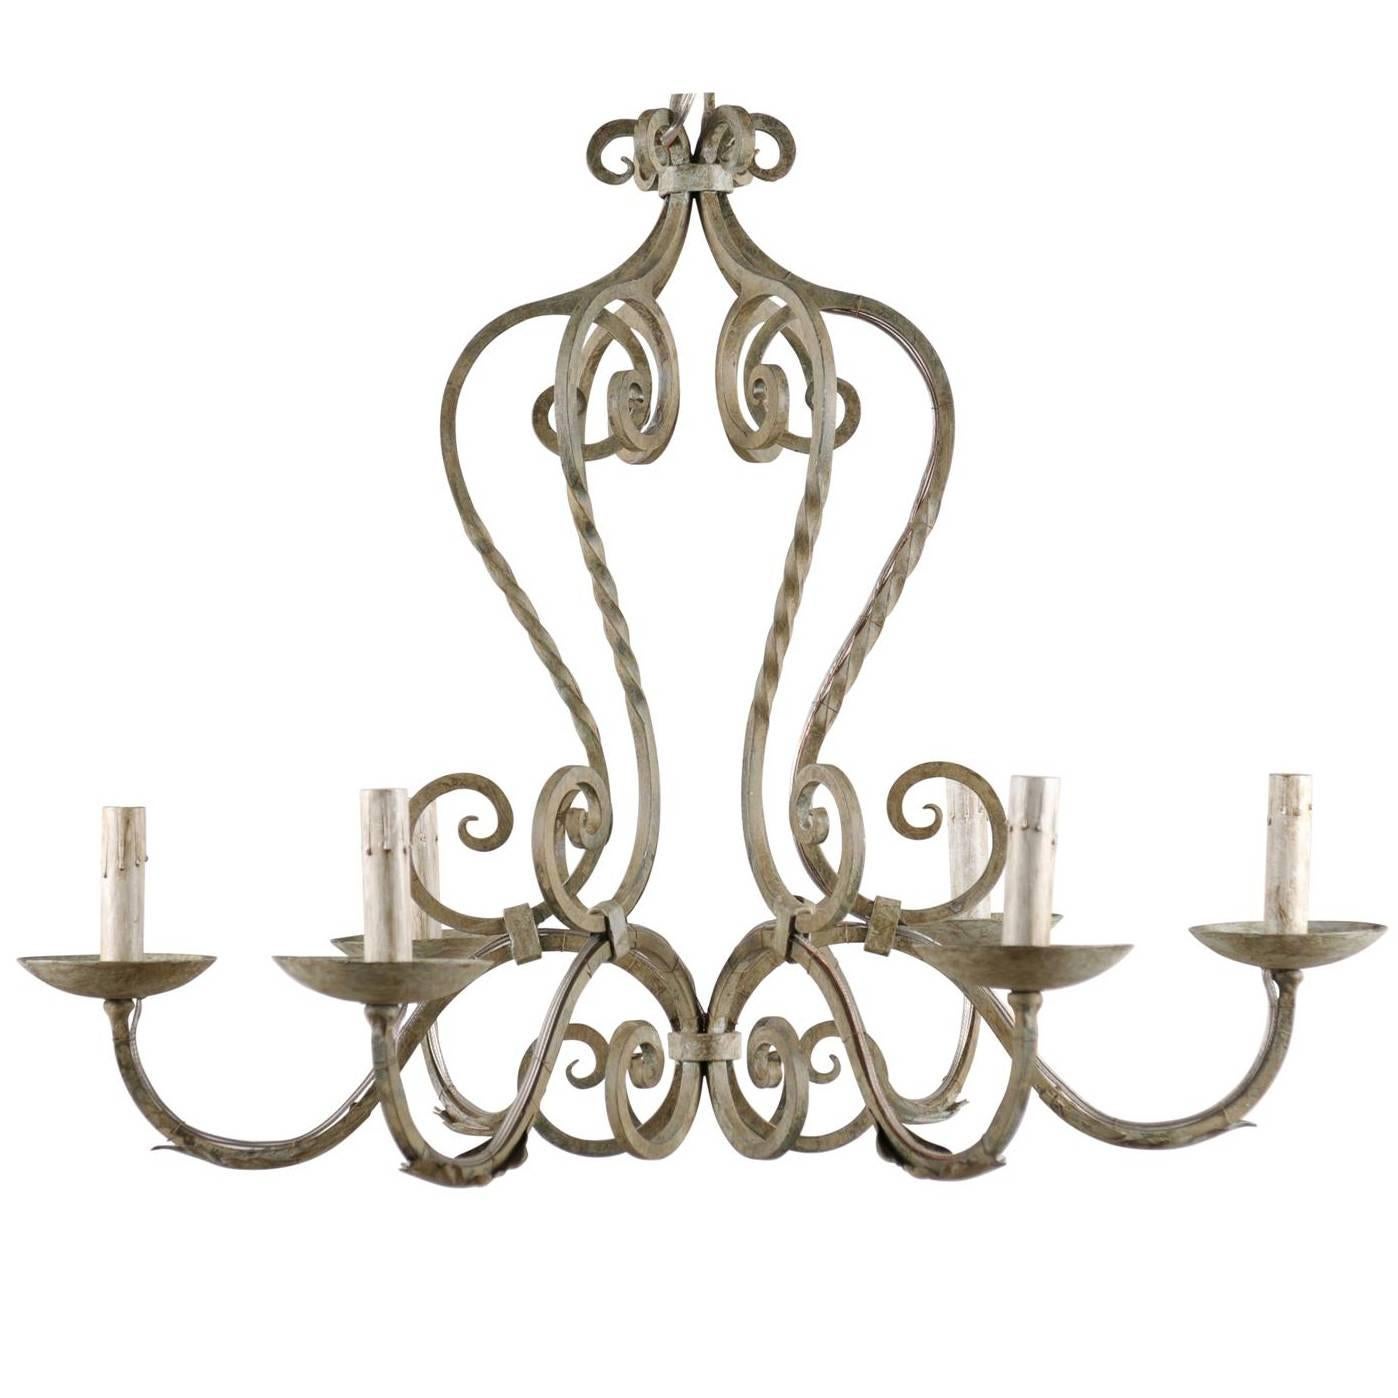 French Vintage Painted Iron 6 Light Chandelier with S-Scrolls Neutral Grey Color For Sale